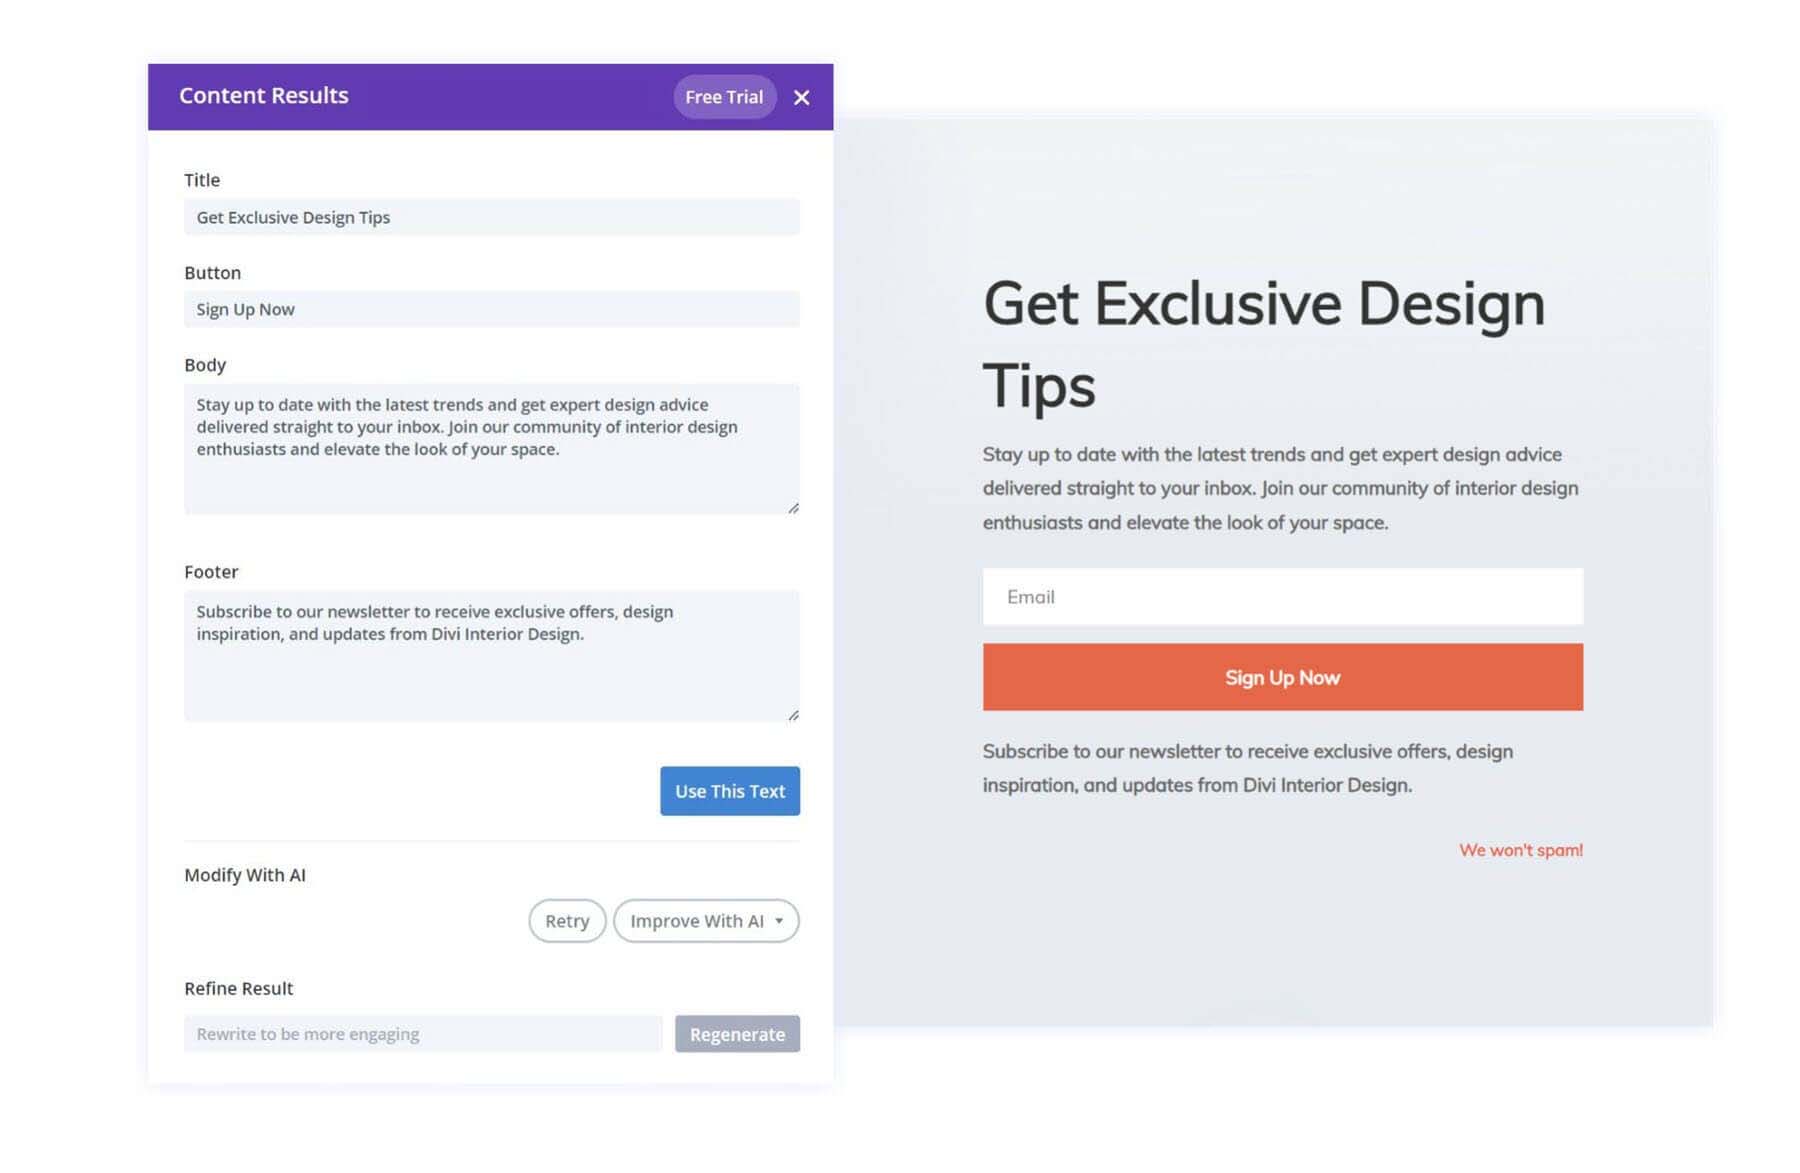 Divi AI and creating CTAs in the email module